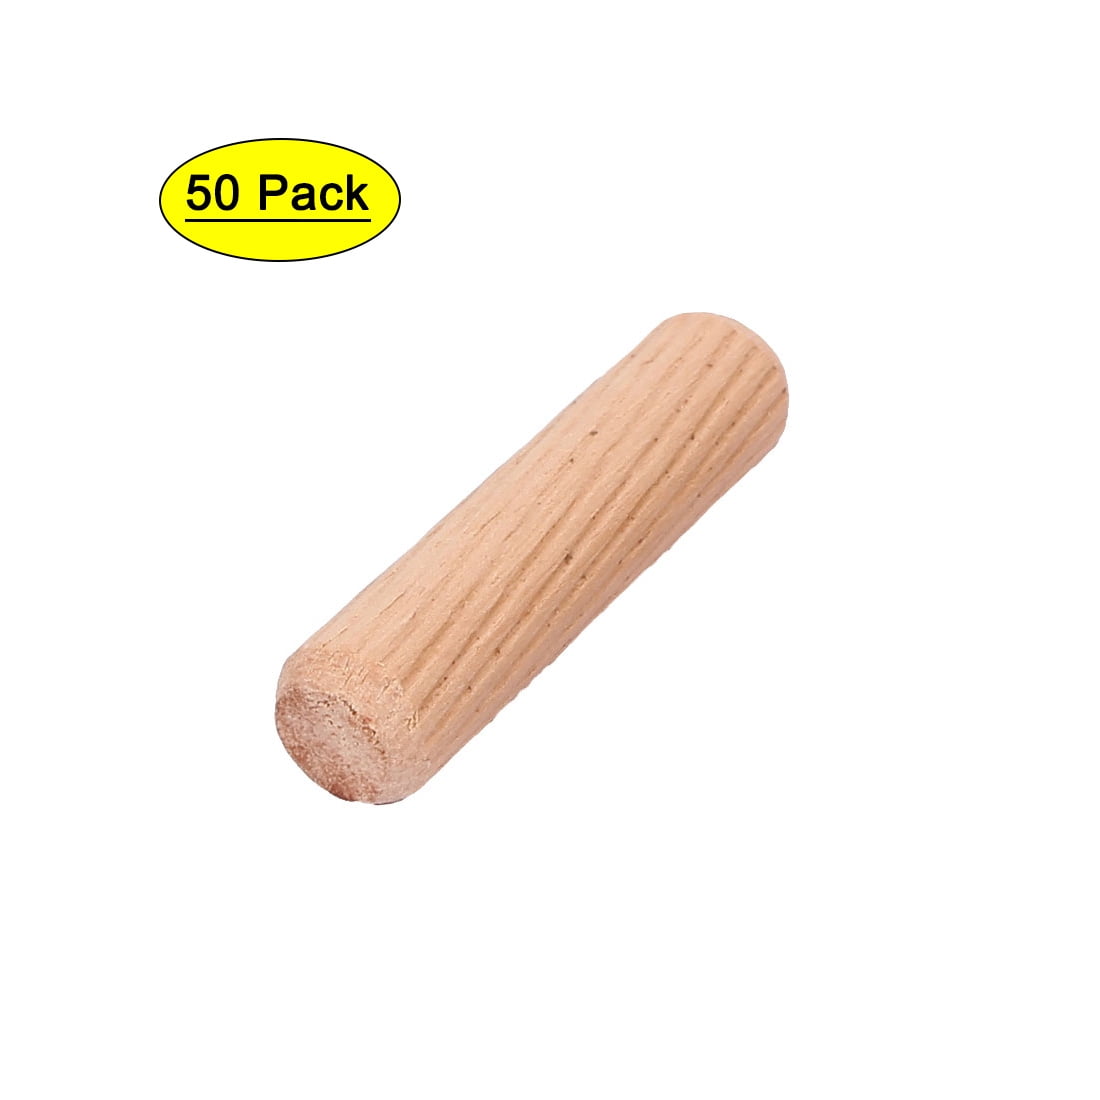 Pack of 500 Pinehurst Crafts 1/4 Inch x 2 Inch Fluted Wood Dowel Pins